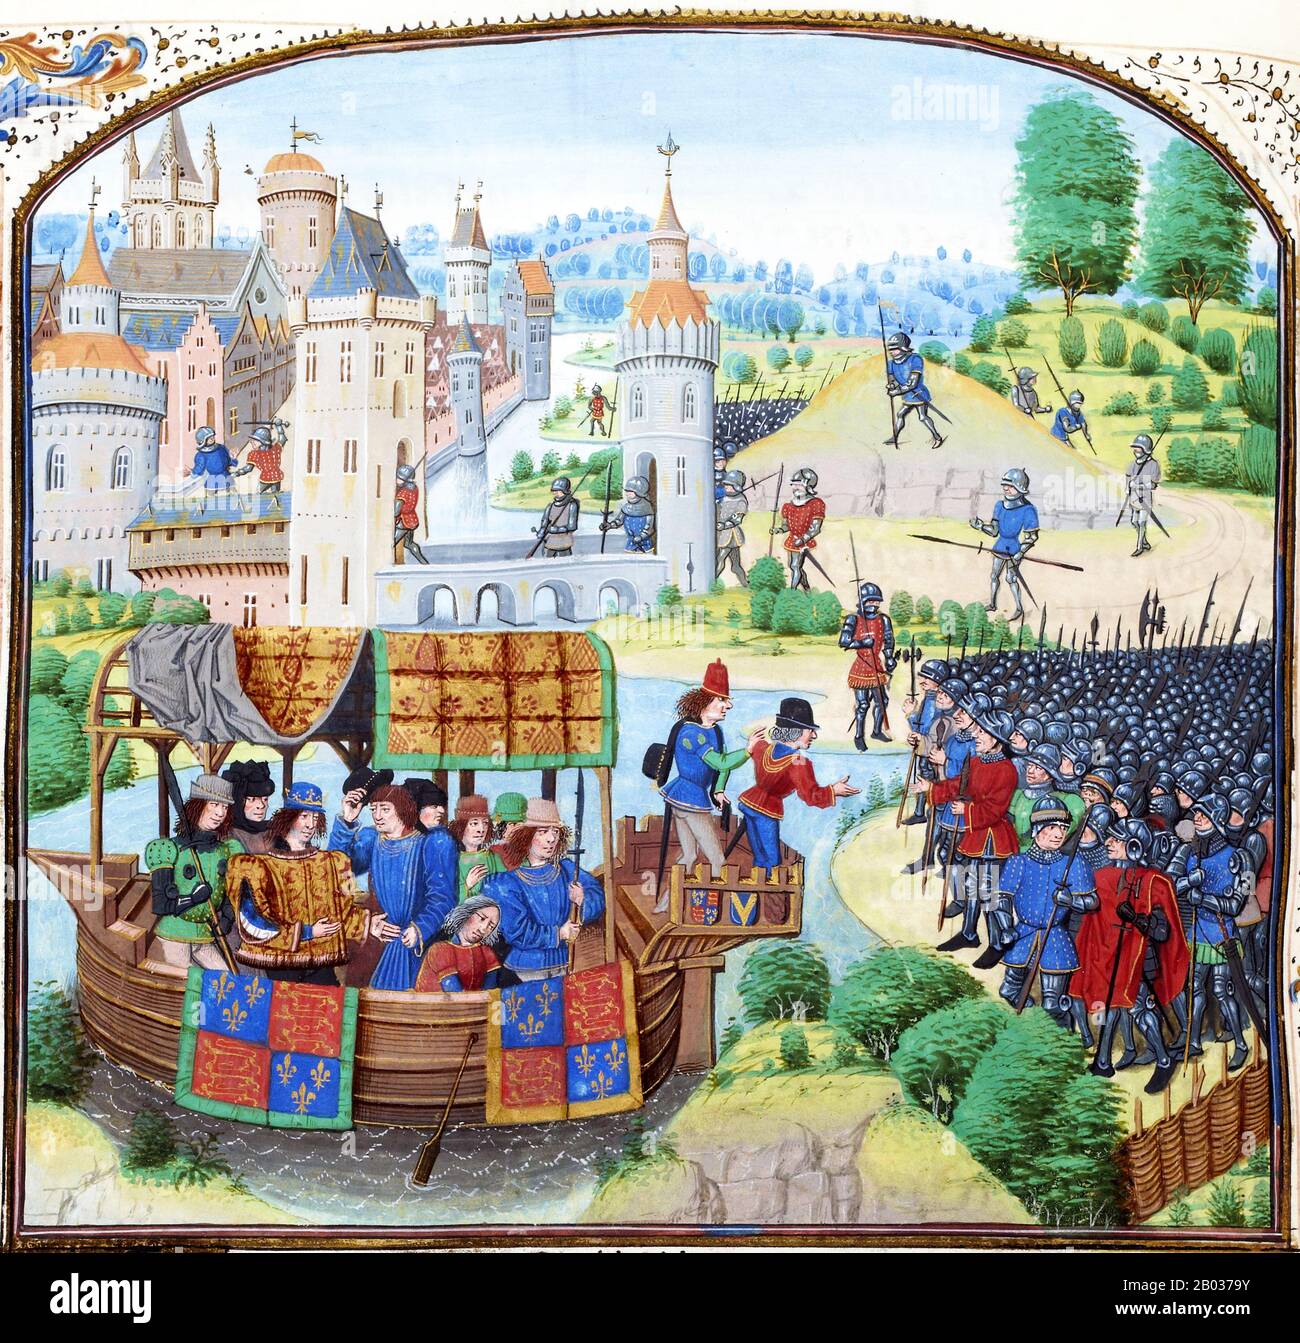 The Peasants' Revolt, also called Wat Tyler's Rebellion or the Great Rising, was a major uprising across large parts of England in 1381. The revolt had various causes, including the socio-economic and political tensions generated by the Black Death in the 1340s, the high taxes resulting from the conflict with France during the Hundred Years' War, and instability within the local leadership of London. The final trigger for the revolt was the intervention of a royal official, John Bampton, in Essex on 30 May 1381. His attempts to collect unpaid poll taxes in Brentwood ended in a violent confront Stock Photo